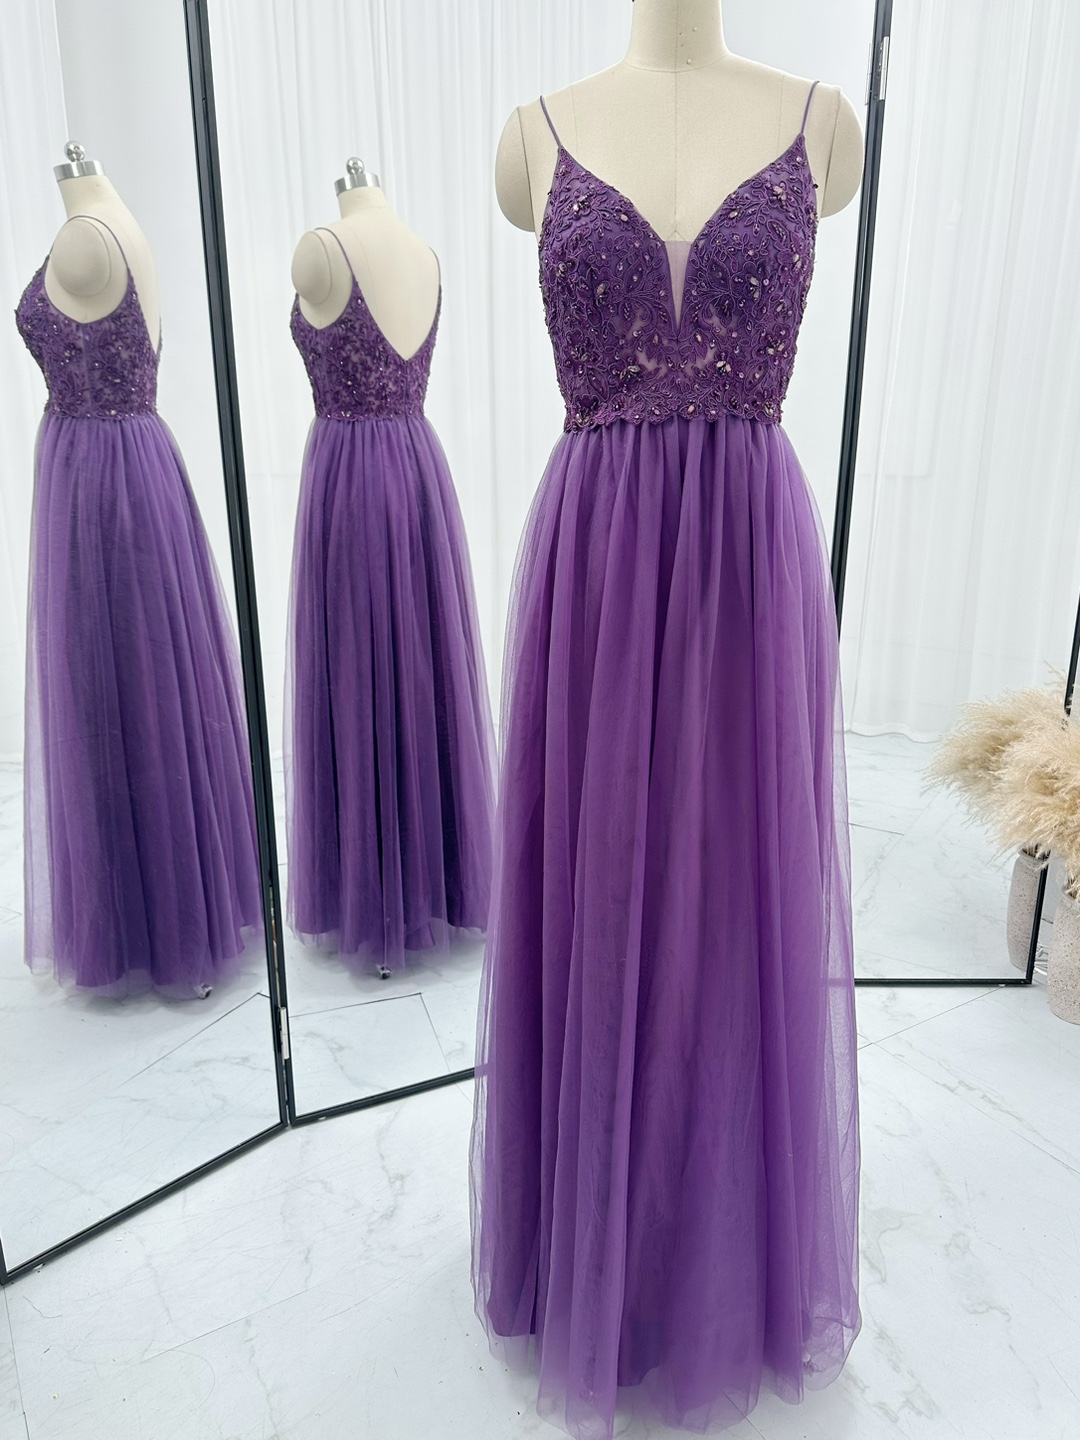 Spaghetti Straps Floor Length Purple Prom Dress Special Occasion Evening Gown